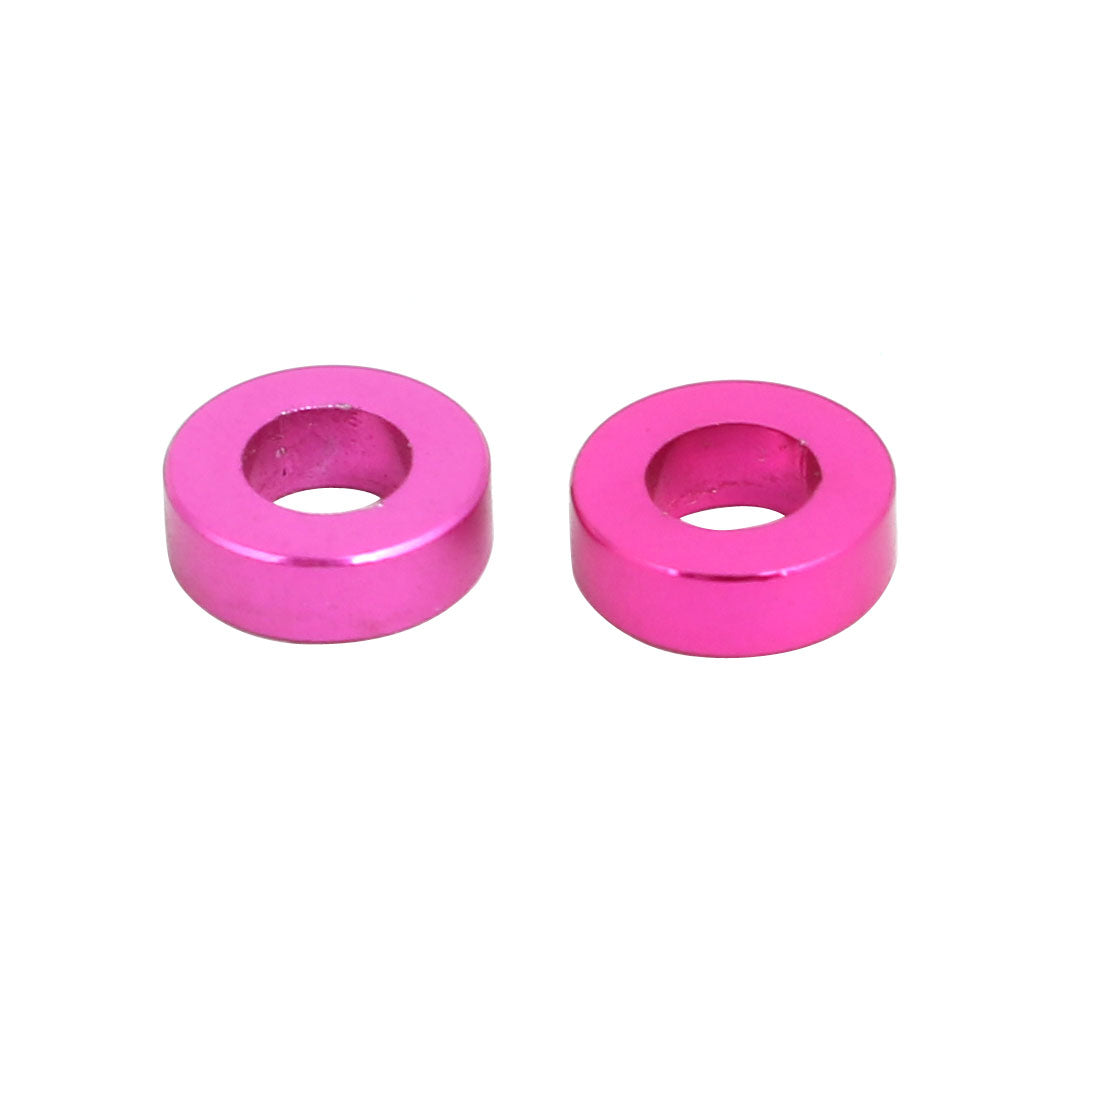 uxcell Uxcell 20pcs 2mm Thickness M3 Aluminum Alloy Flat  Screw Washer Pink